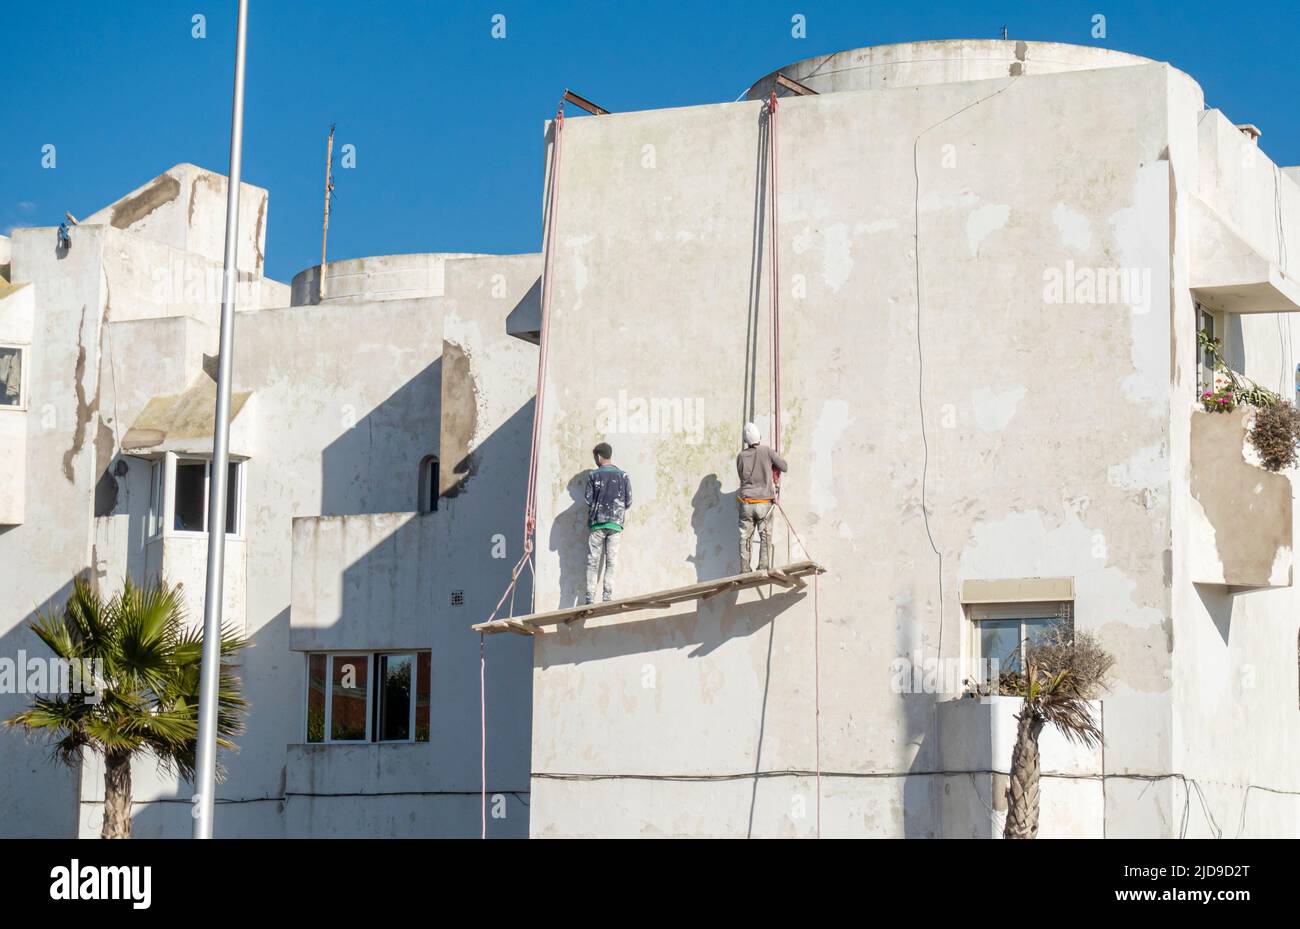 Workers on hanging platform painting remodelling building in  Lotissement Amal district in Essaouira, Morocco Stock Photo